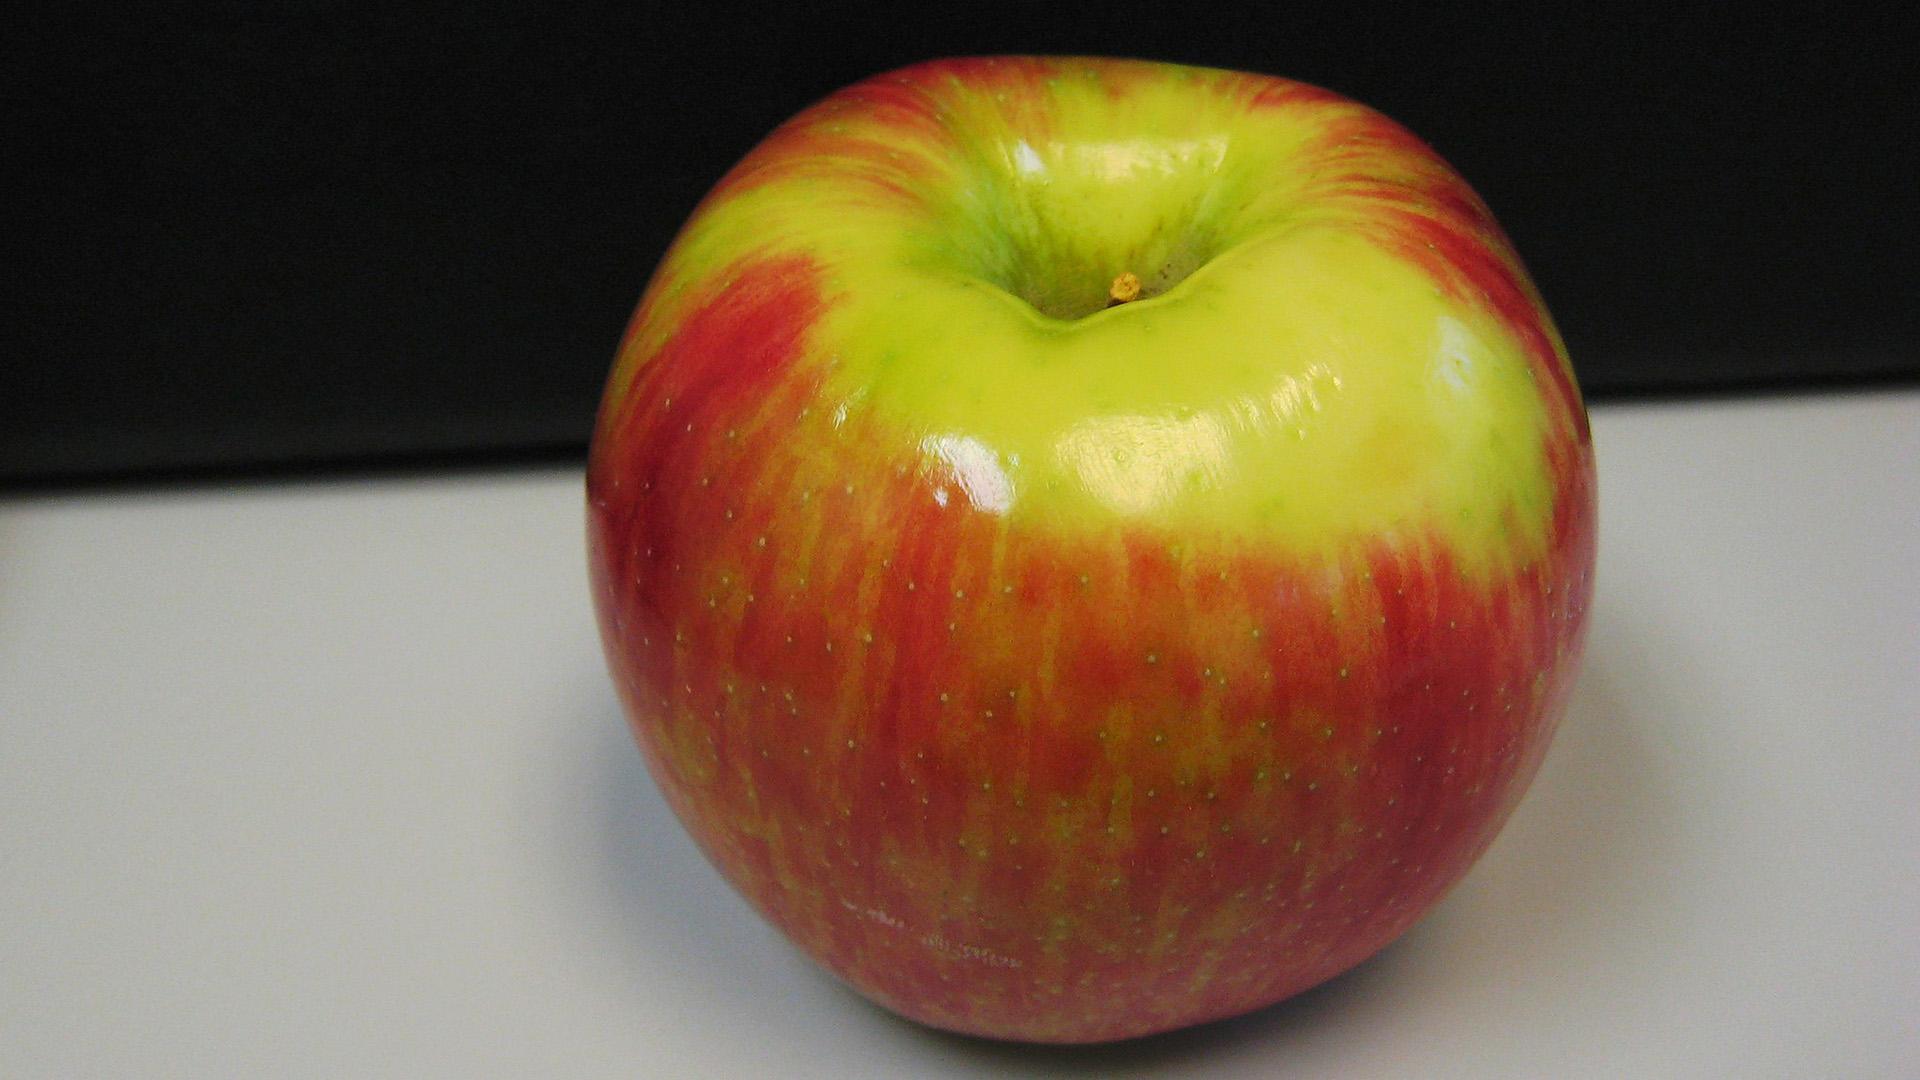 Honeycrisp apples are among the six varieties of apples being recalled due to possible listeria contamination. (Keagiles via Wikimedia Commons)